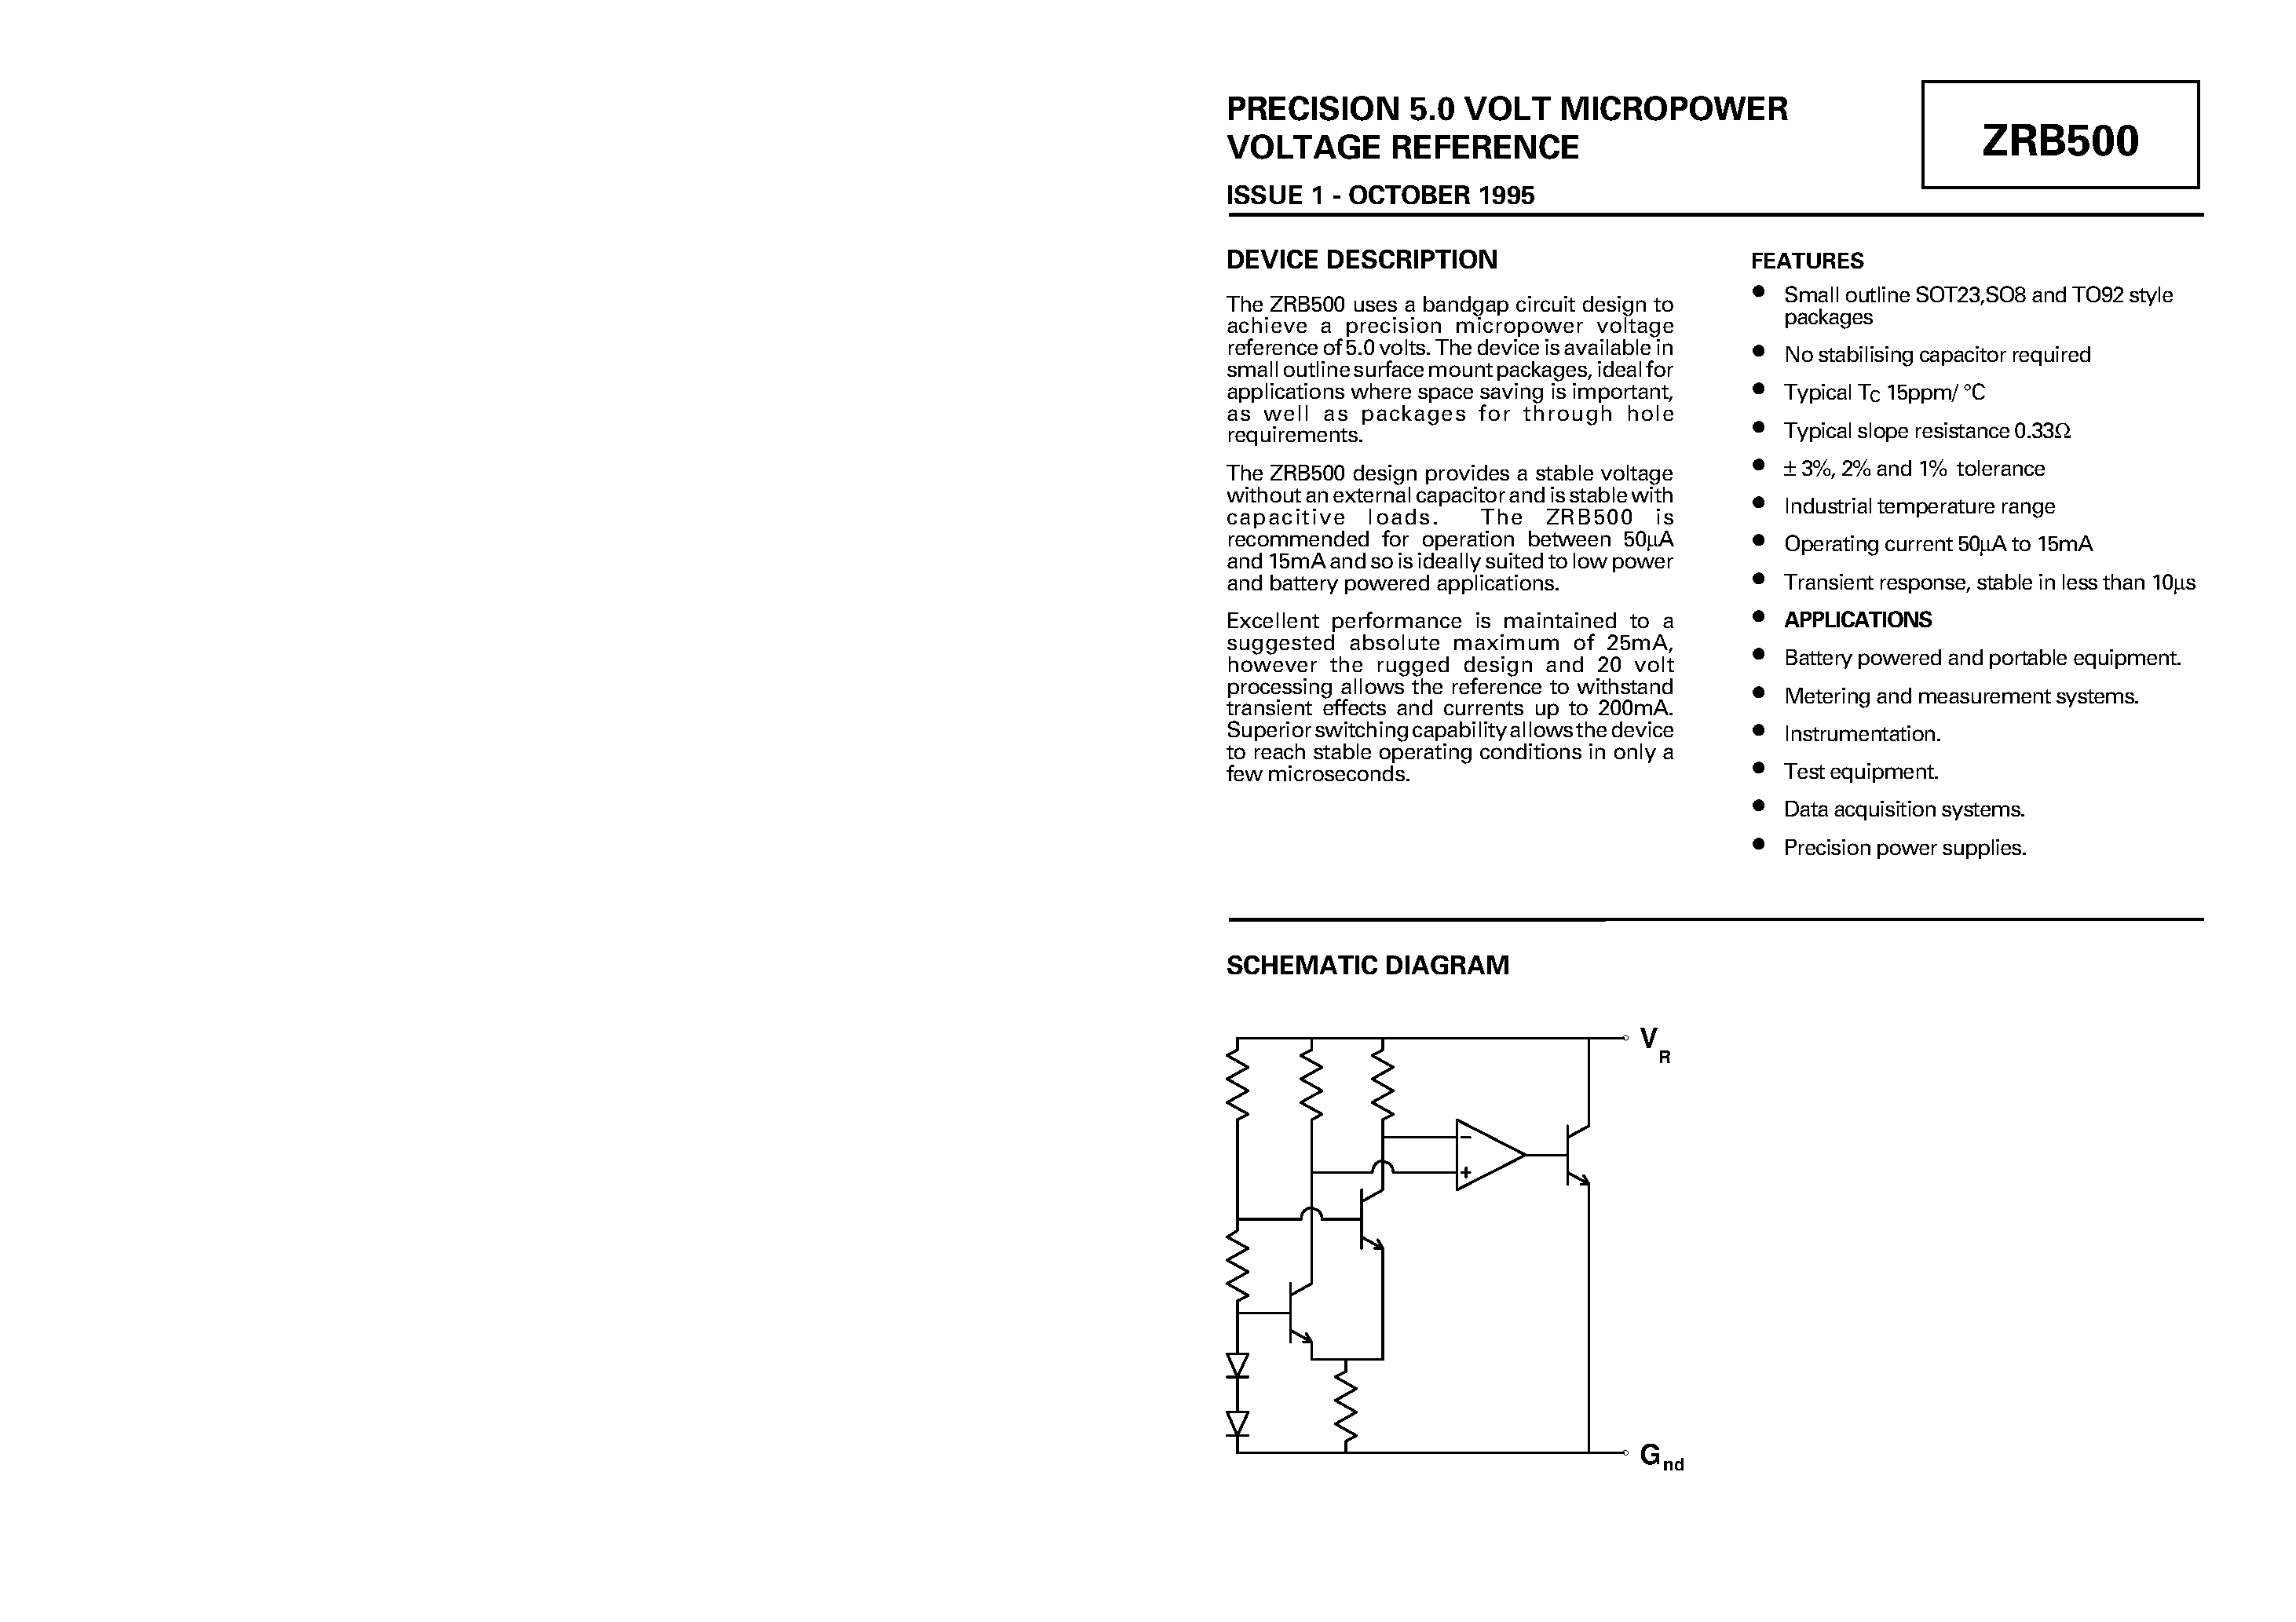 Datasheet ZRB500N803 - PRECISION 5.0 VOLT MICROPOWER VOLTAGE REFERENCE page 1